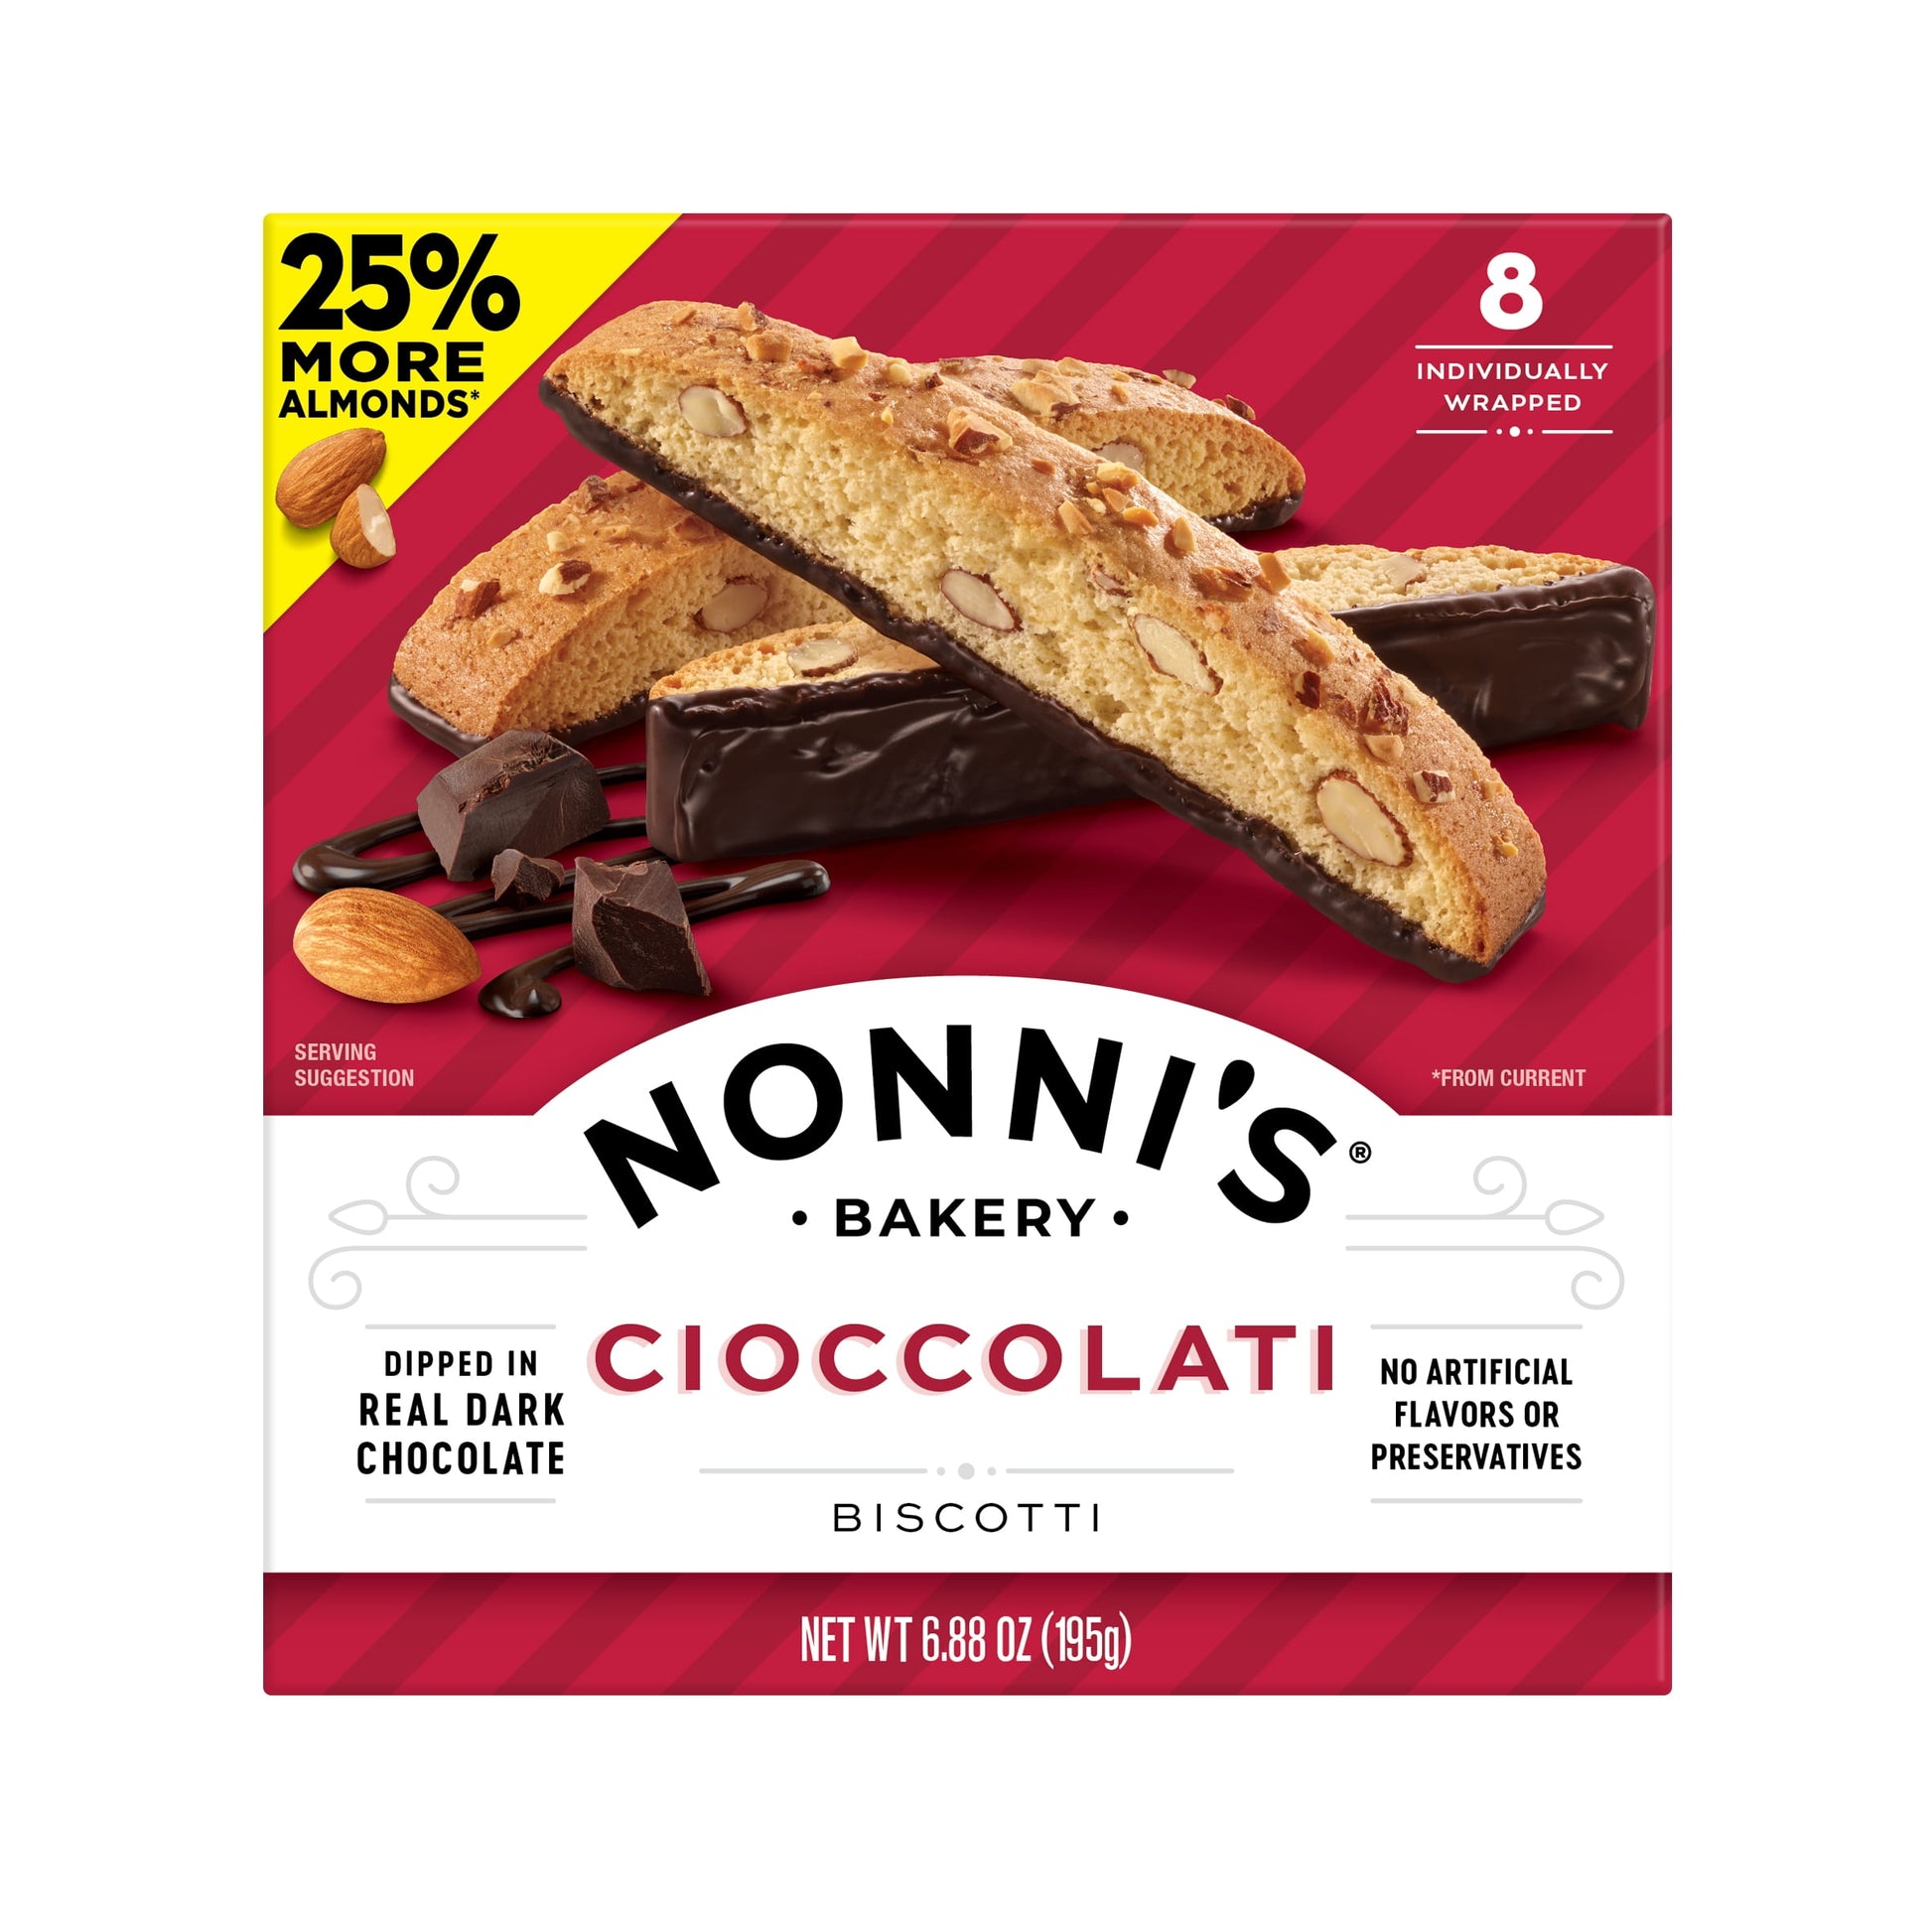 , Cioccolati Biscotti, Dark Chocolate Almond Cookie, 6.8 Oz (195G), 8 Count, Individually Wrapped and Ready to Eat